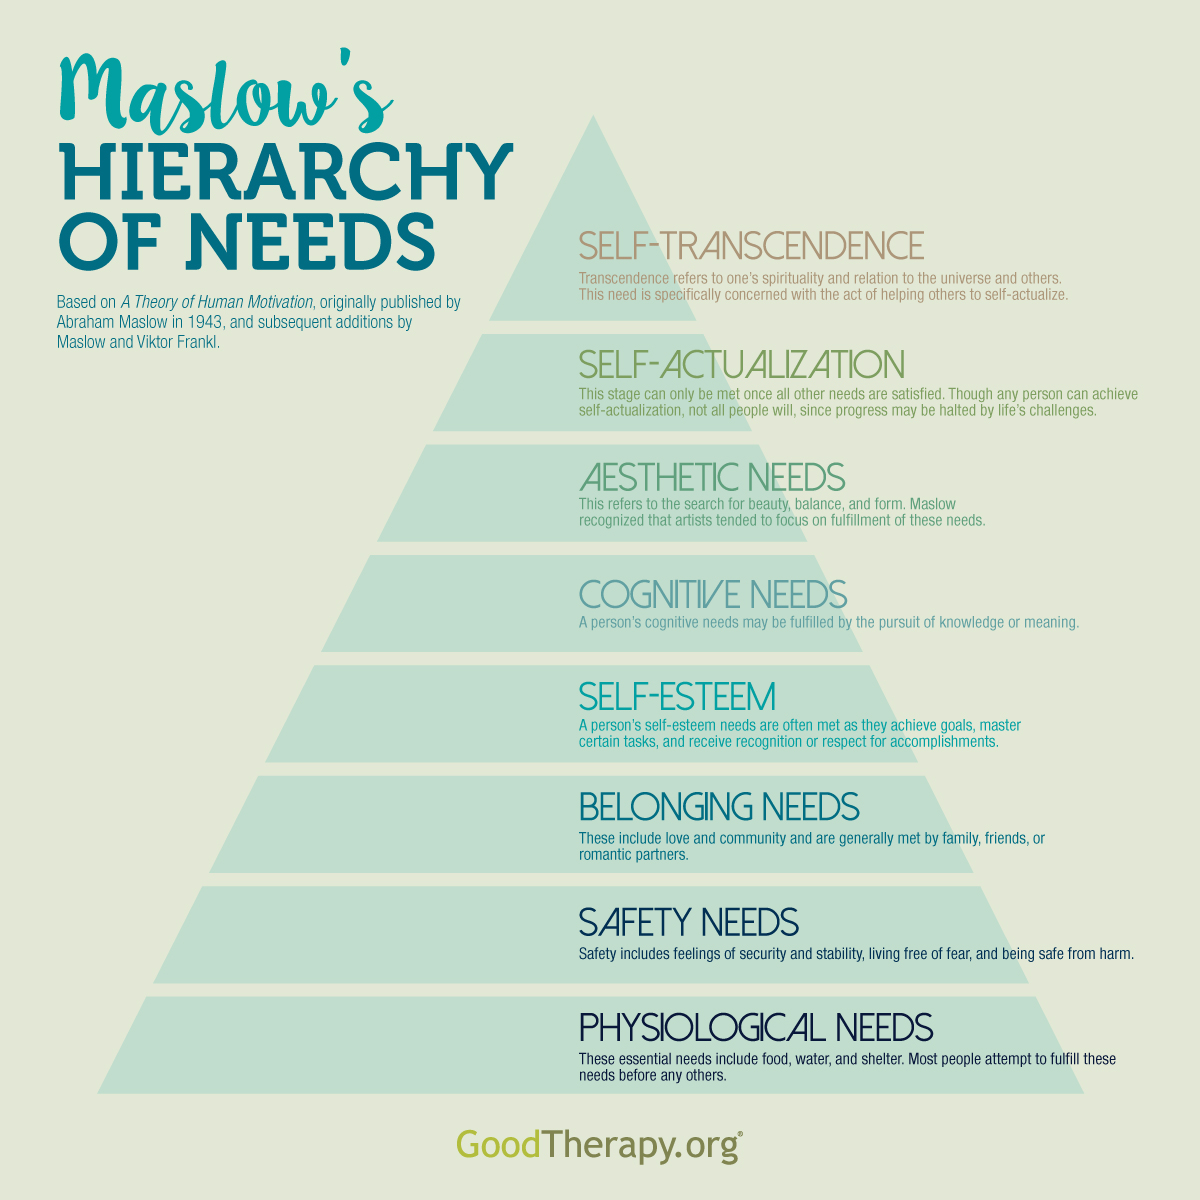 Abraham Maslow s Hierarchy of Needs by GoodTherapy.org